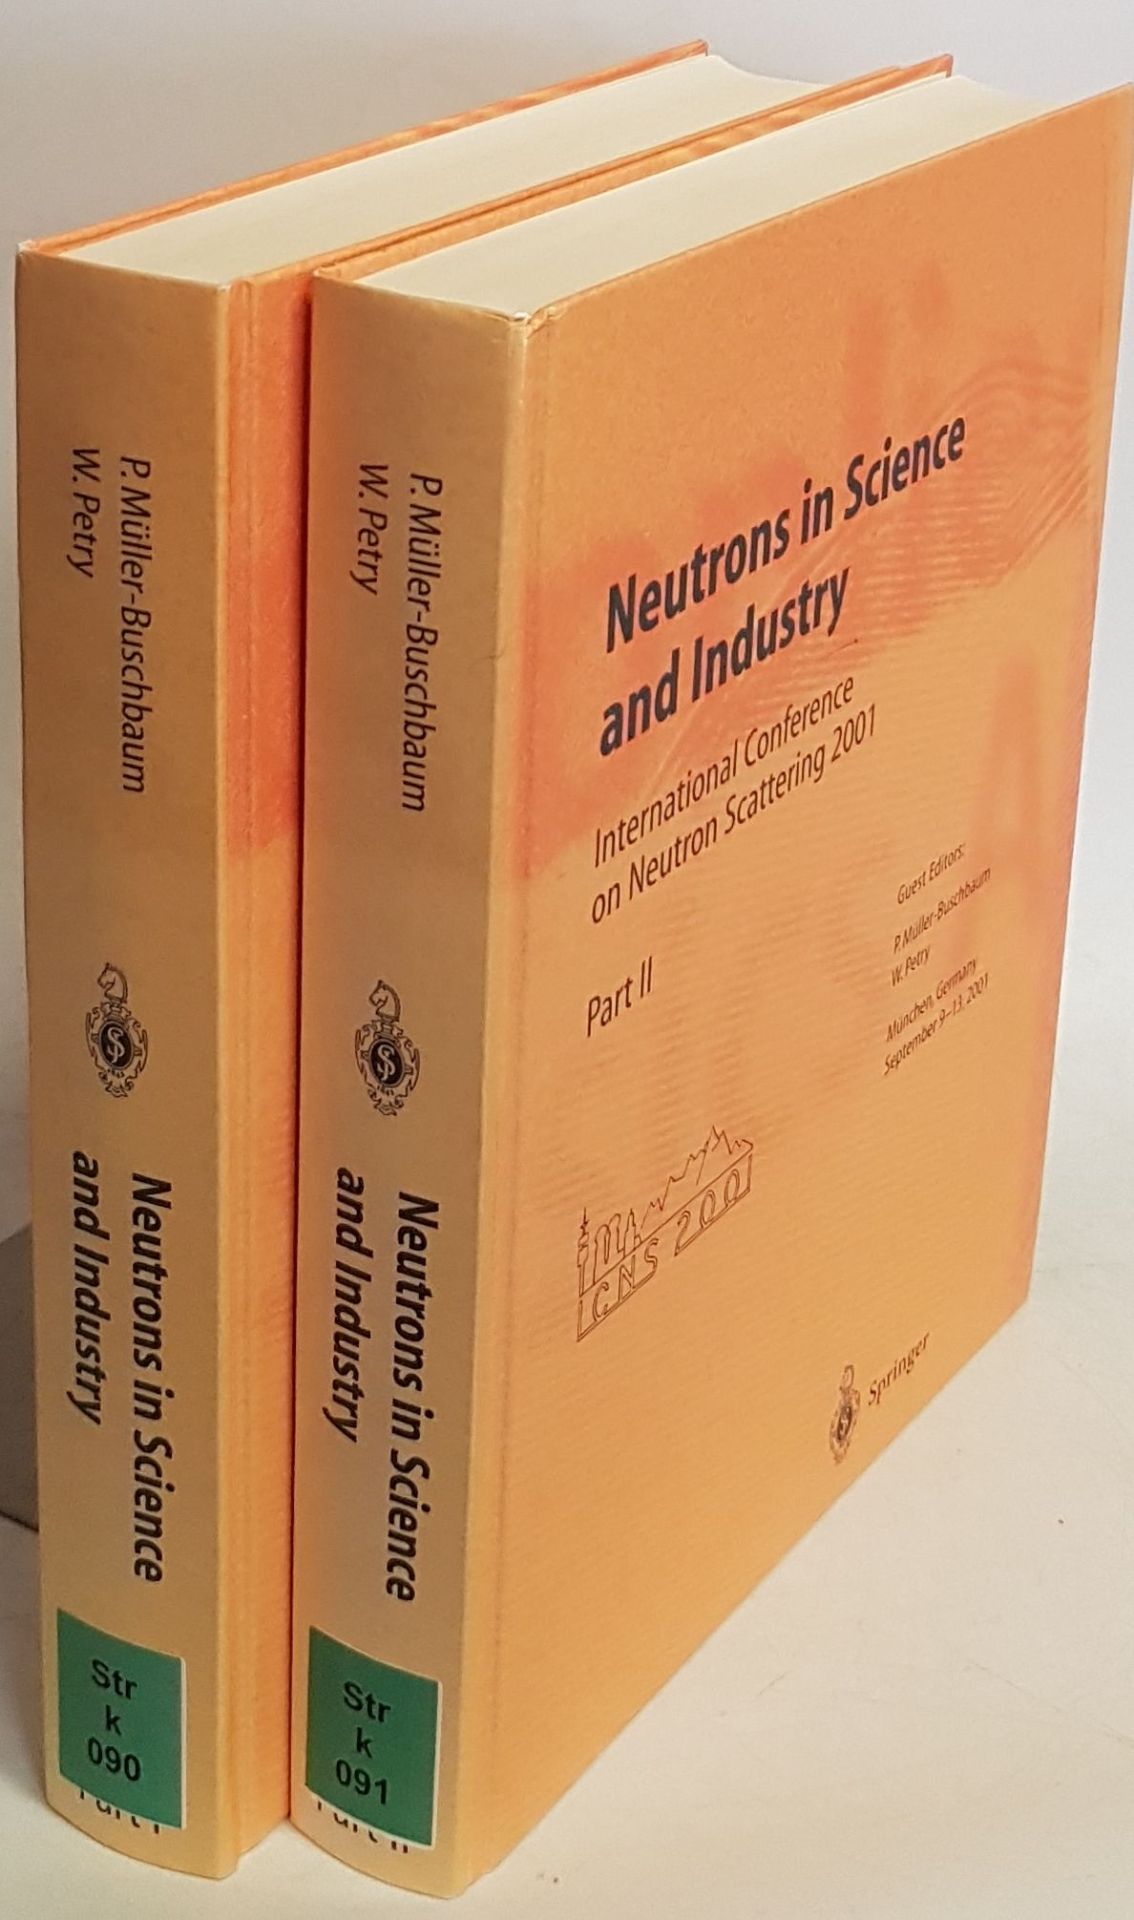 International Conference on Neutron Scattering 2001: Neutrons in Science and Industry (2 parts cpl./ 2 Bände KOMPLETT) - Proceedings of the International Conference on Neutron Scattering 2001, 9-13 September 2001, München, Germany. - Müller-Buschbaum, P. and W. Petry